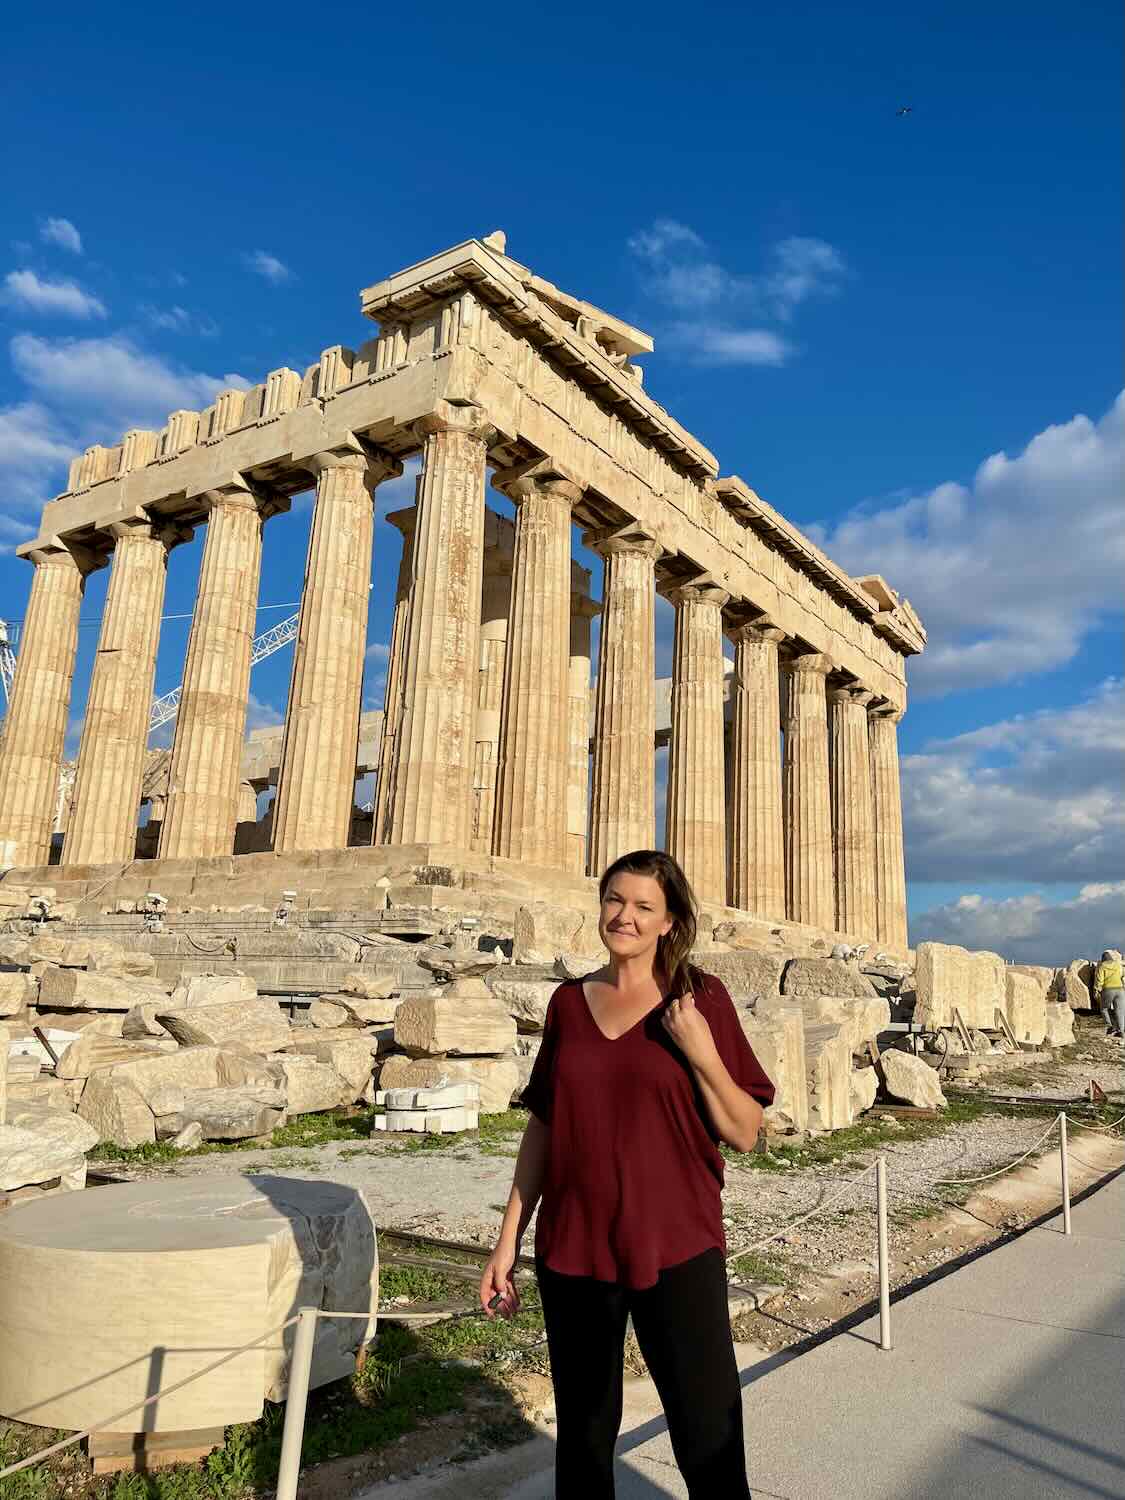 A woman in a red shirt and black pants standing in front of the Parthenon, an ancient Greek temple with iconic Doric columns on the Acropolis of Athens, Greece.